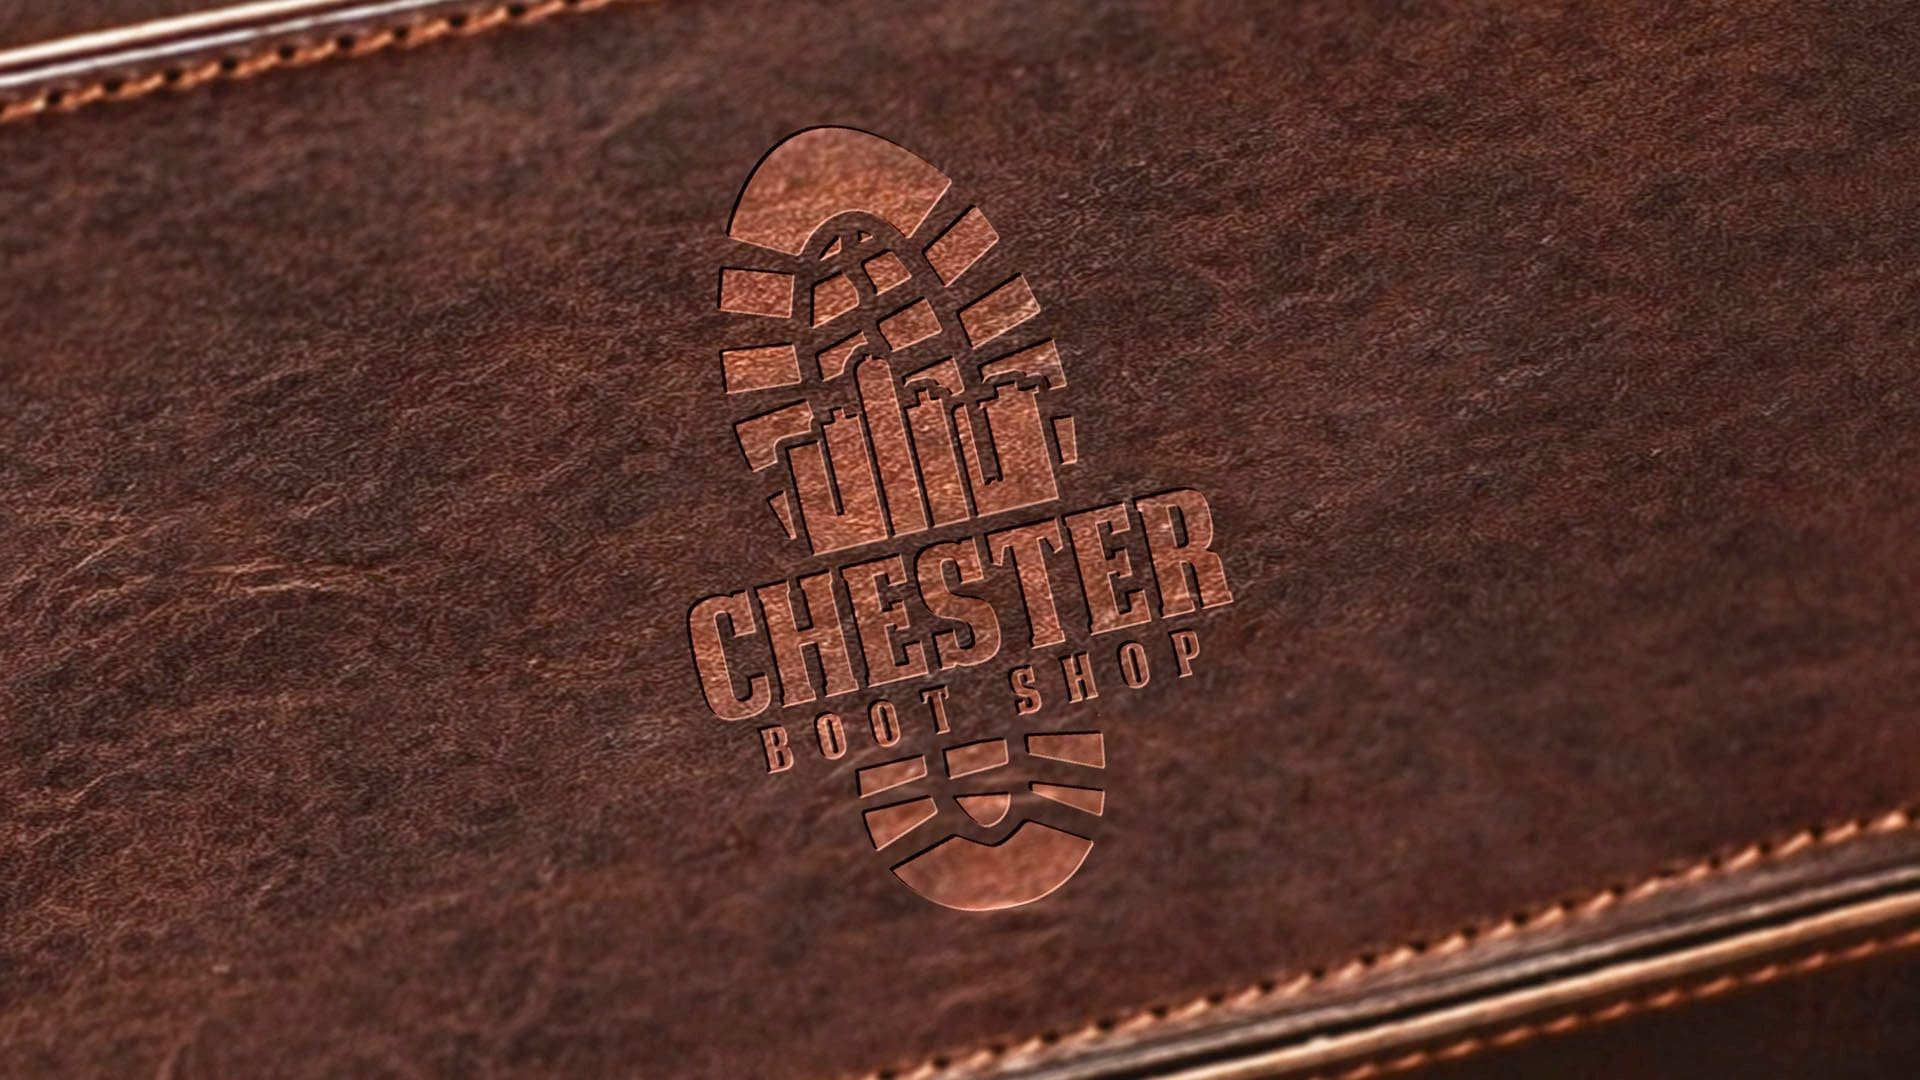 Chester Boot Shop Mockup 2